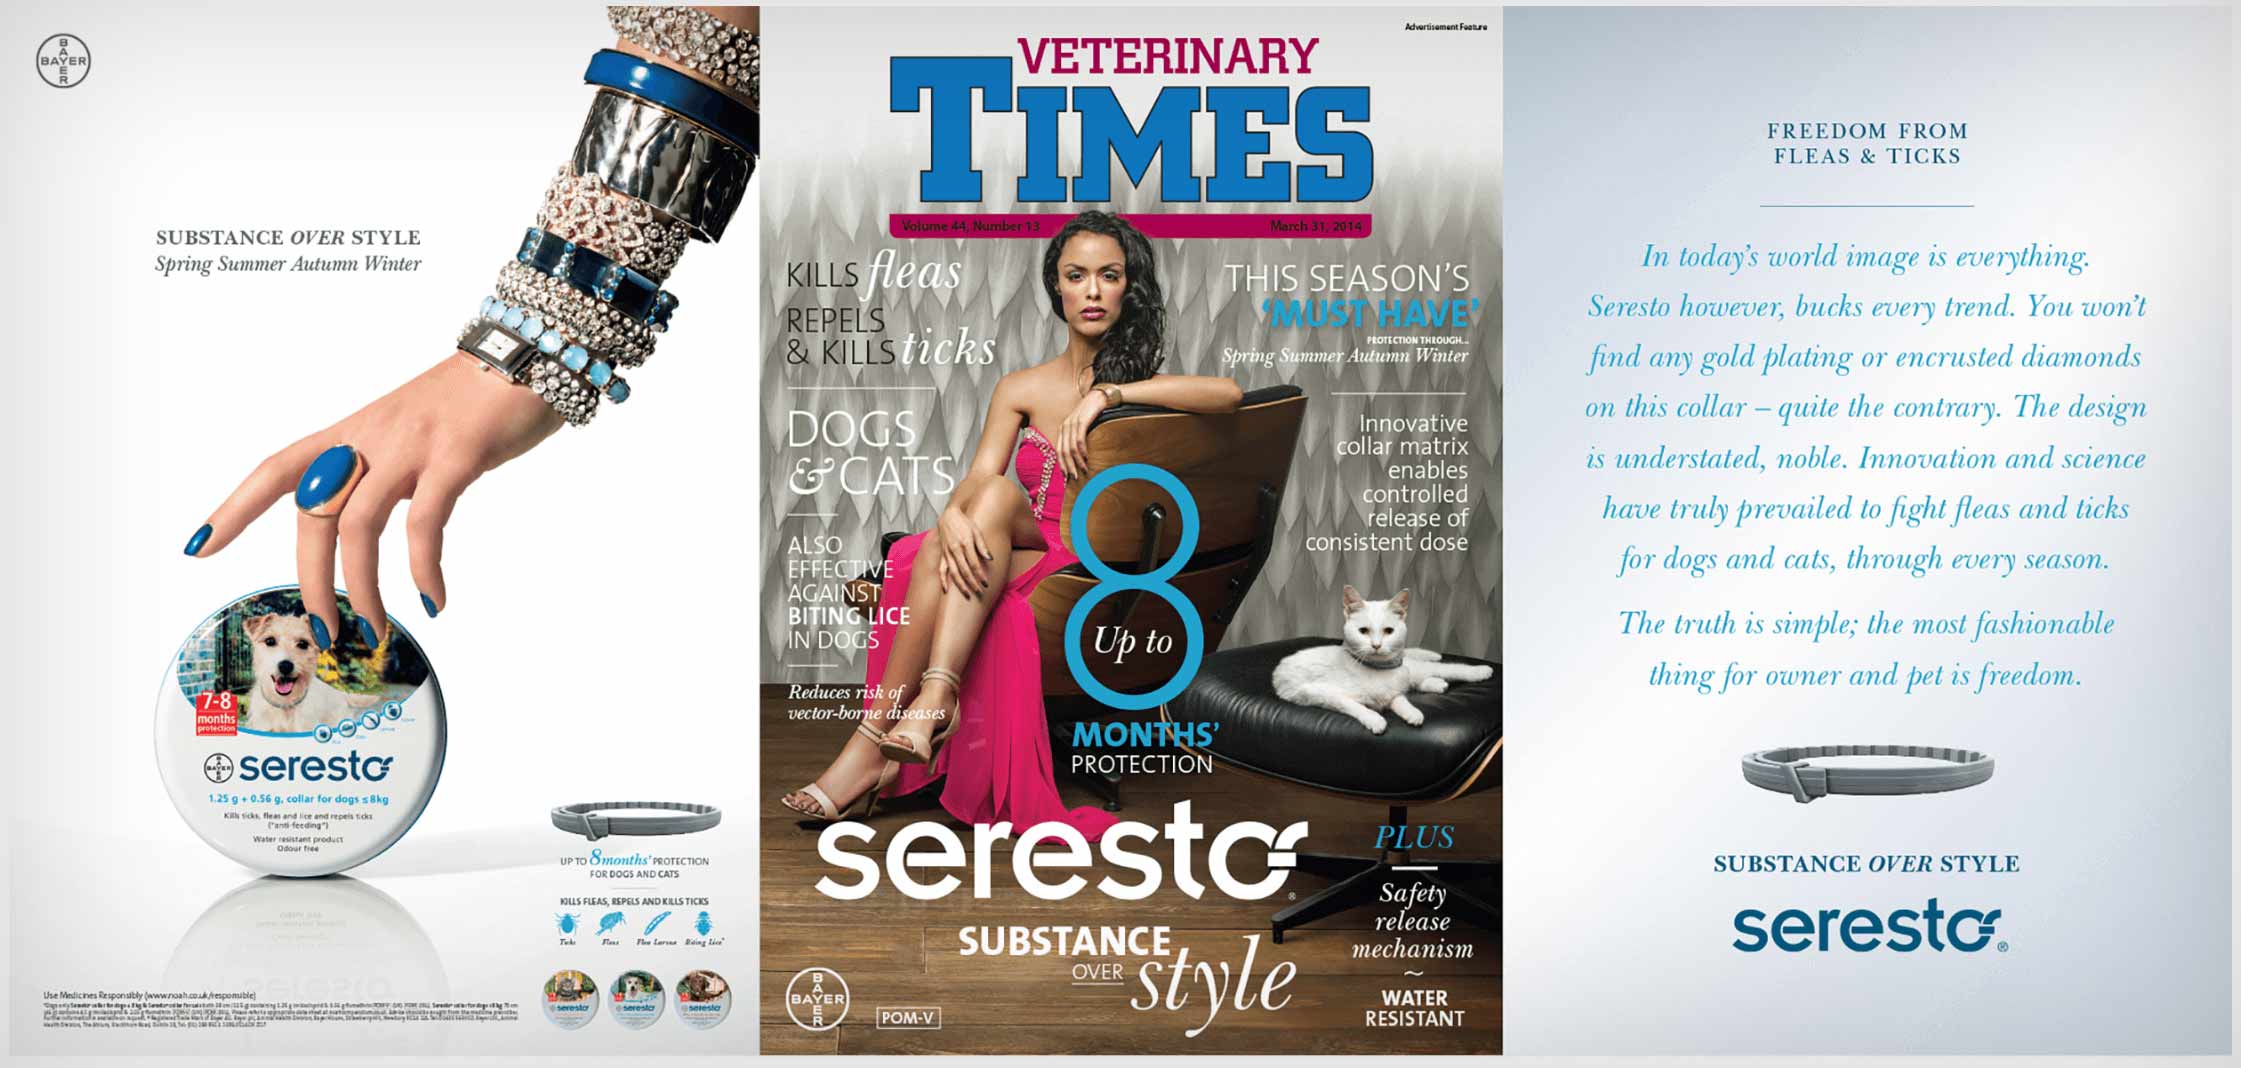 Seresto magazine fold out front cover advert